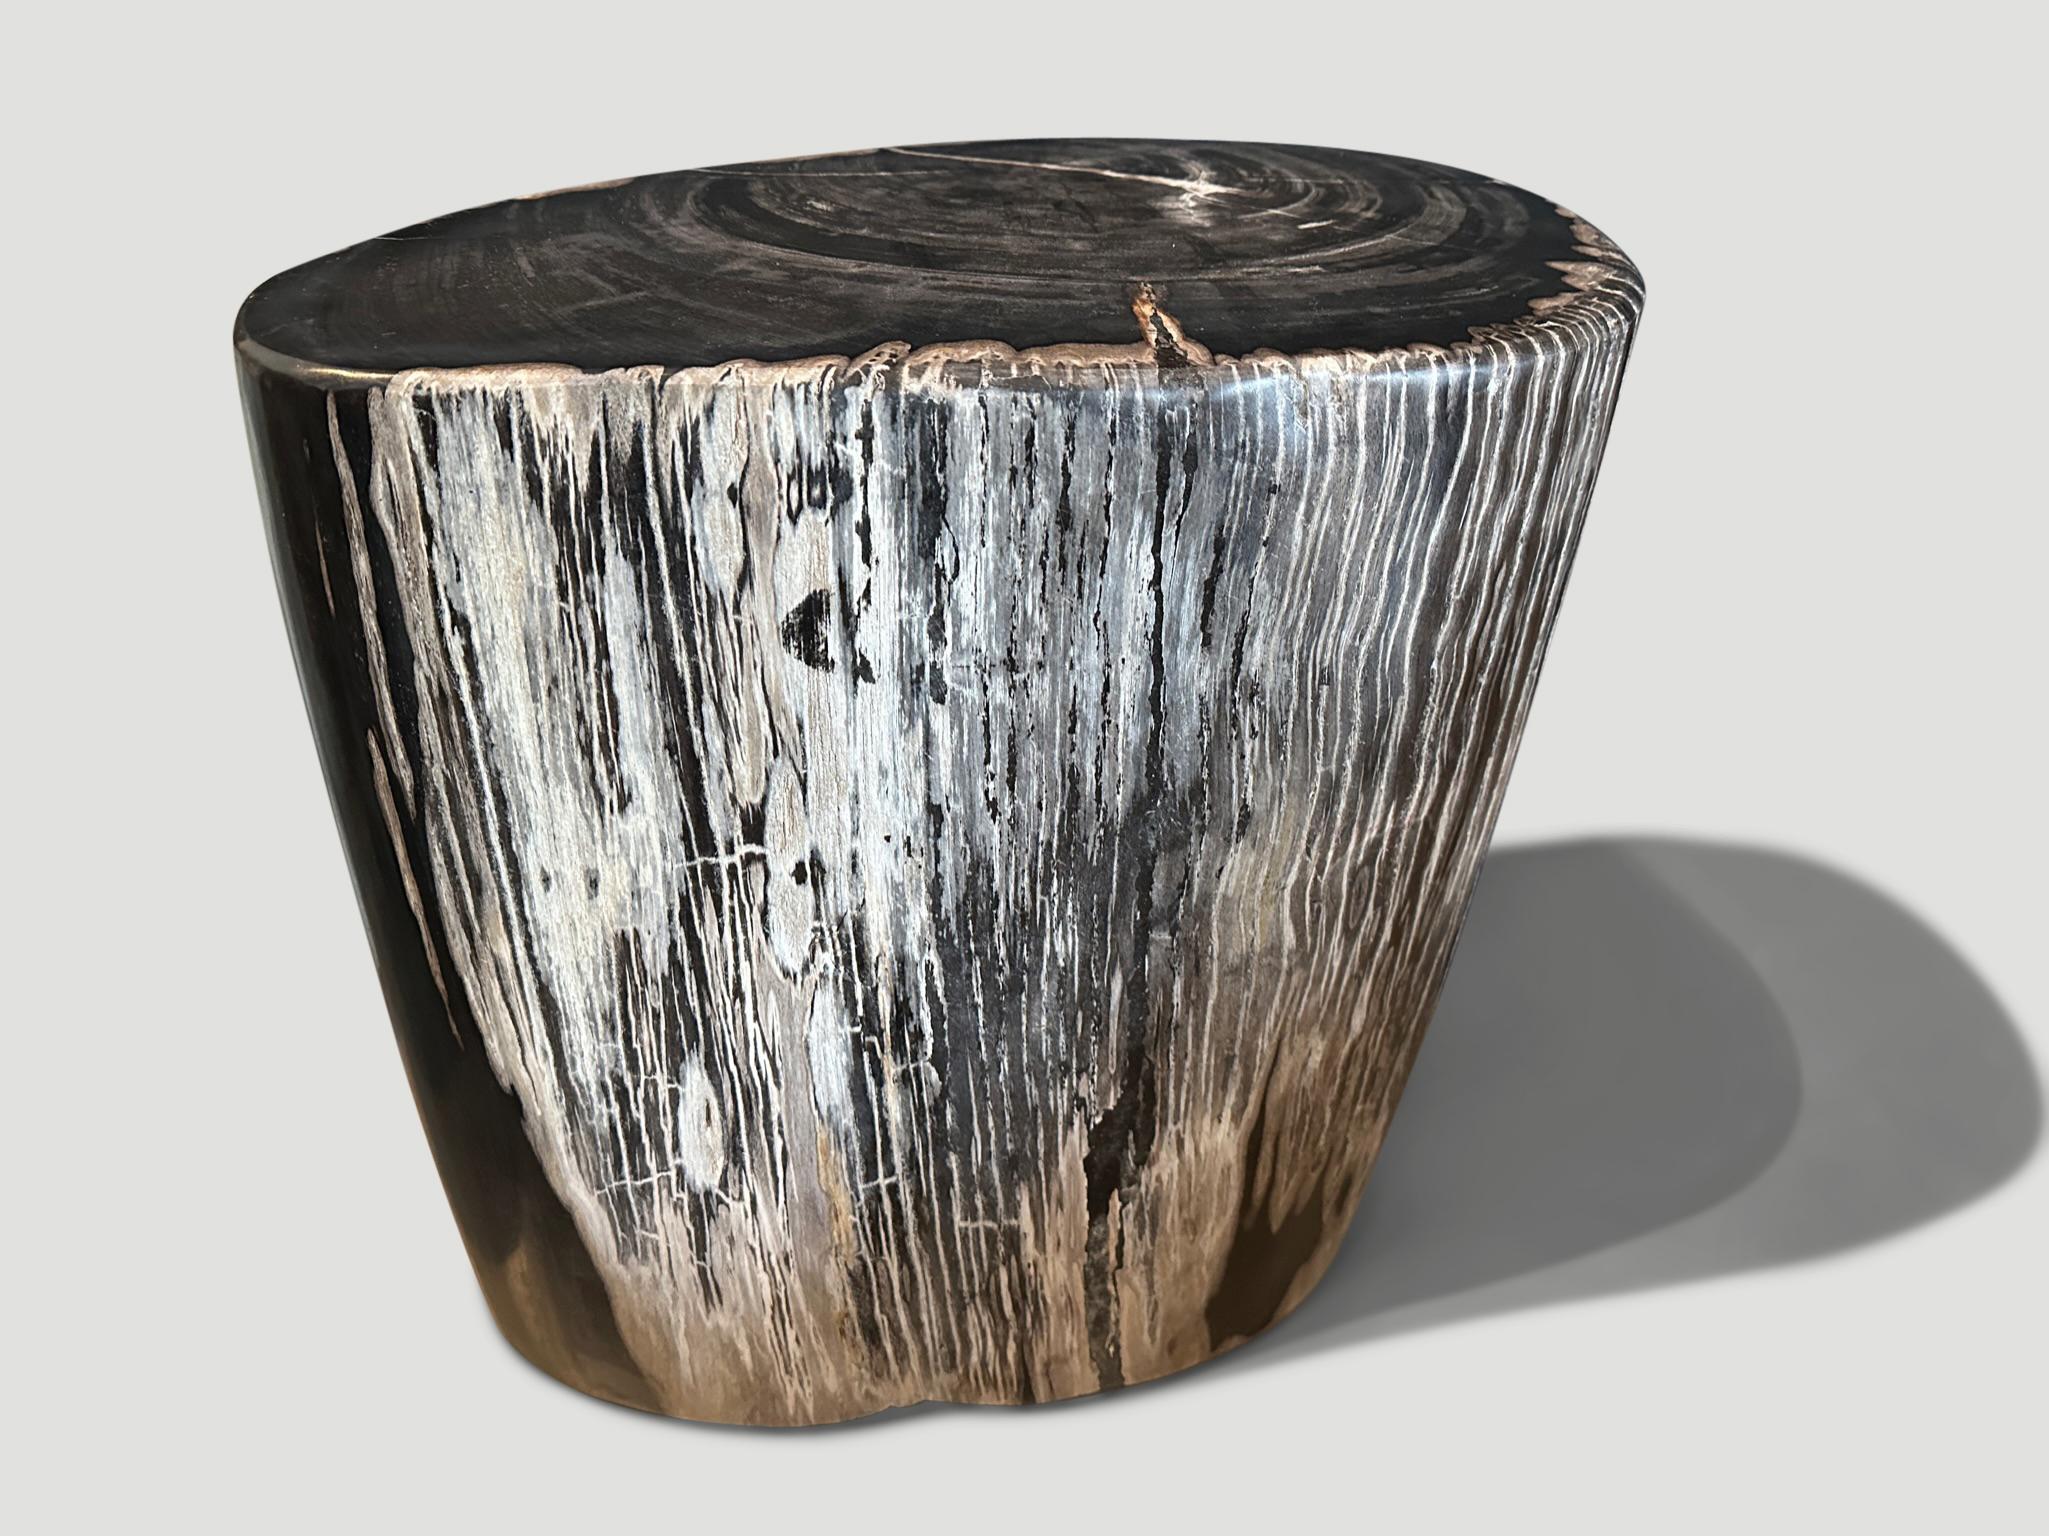 Impressive beautiful contrasting markings on this large high quality ancient petrified wood side table. It’s fascinating how Mother Nature produces these stunning 40 million year old petrified teak logs with such contrasting colors and natural